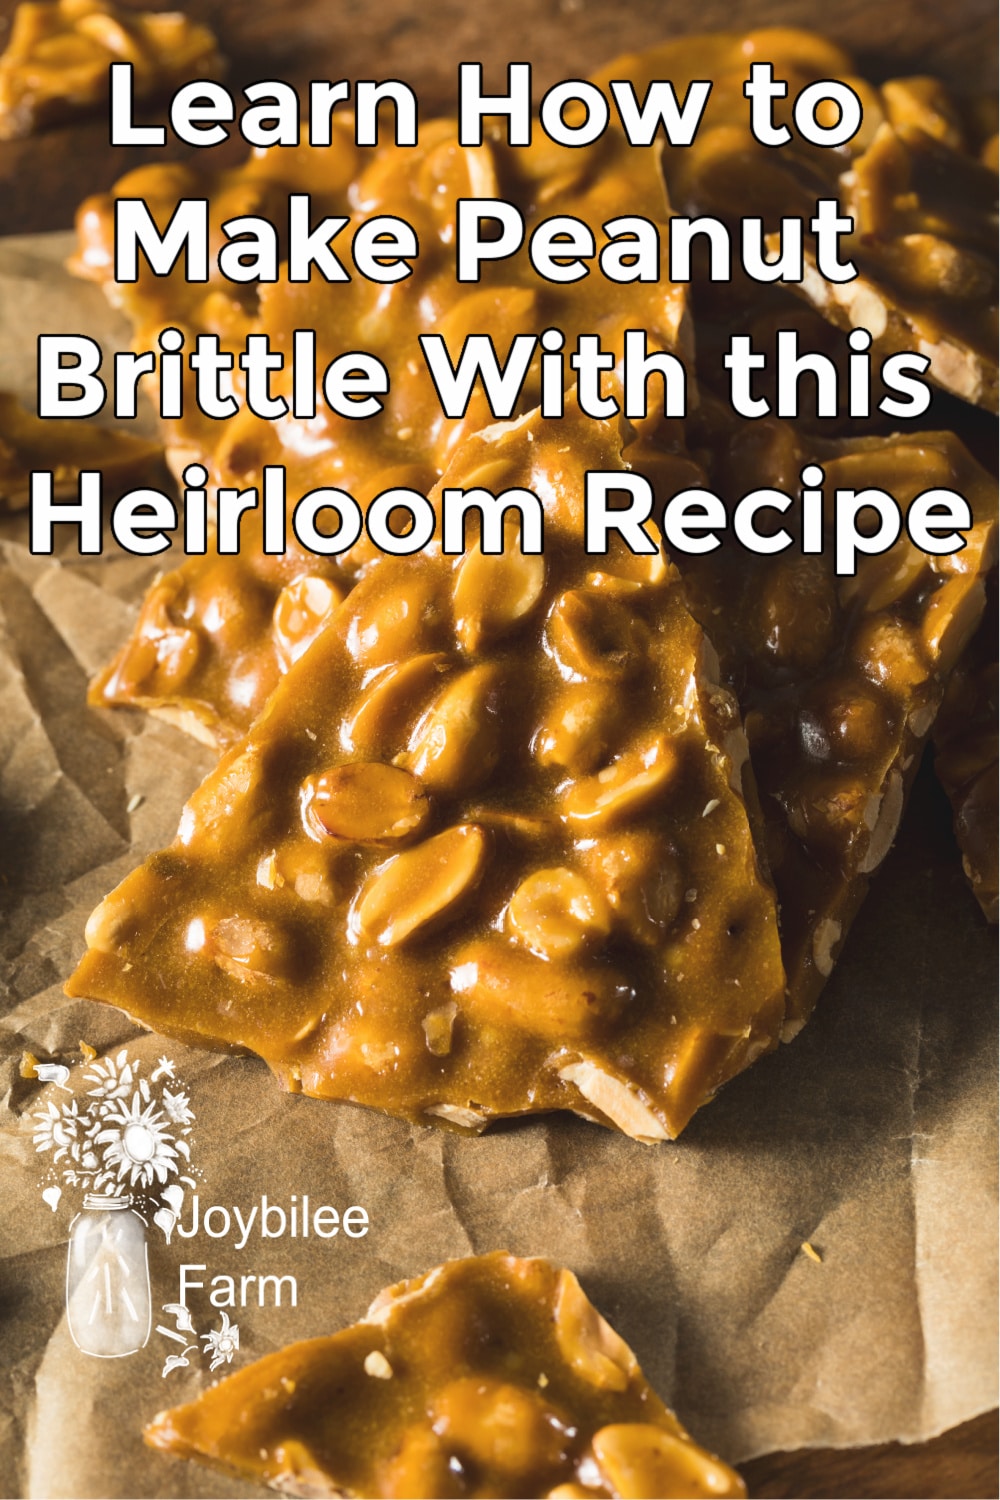 peanut brittle on a paper background